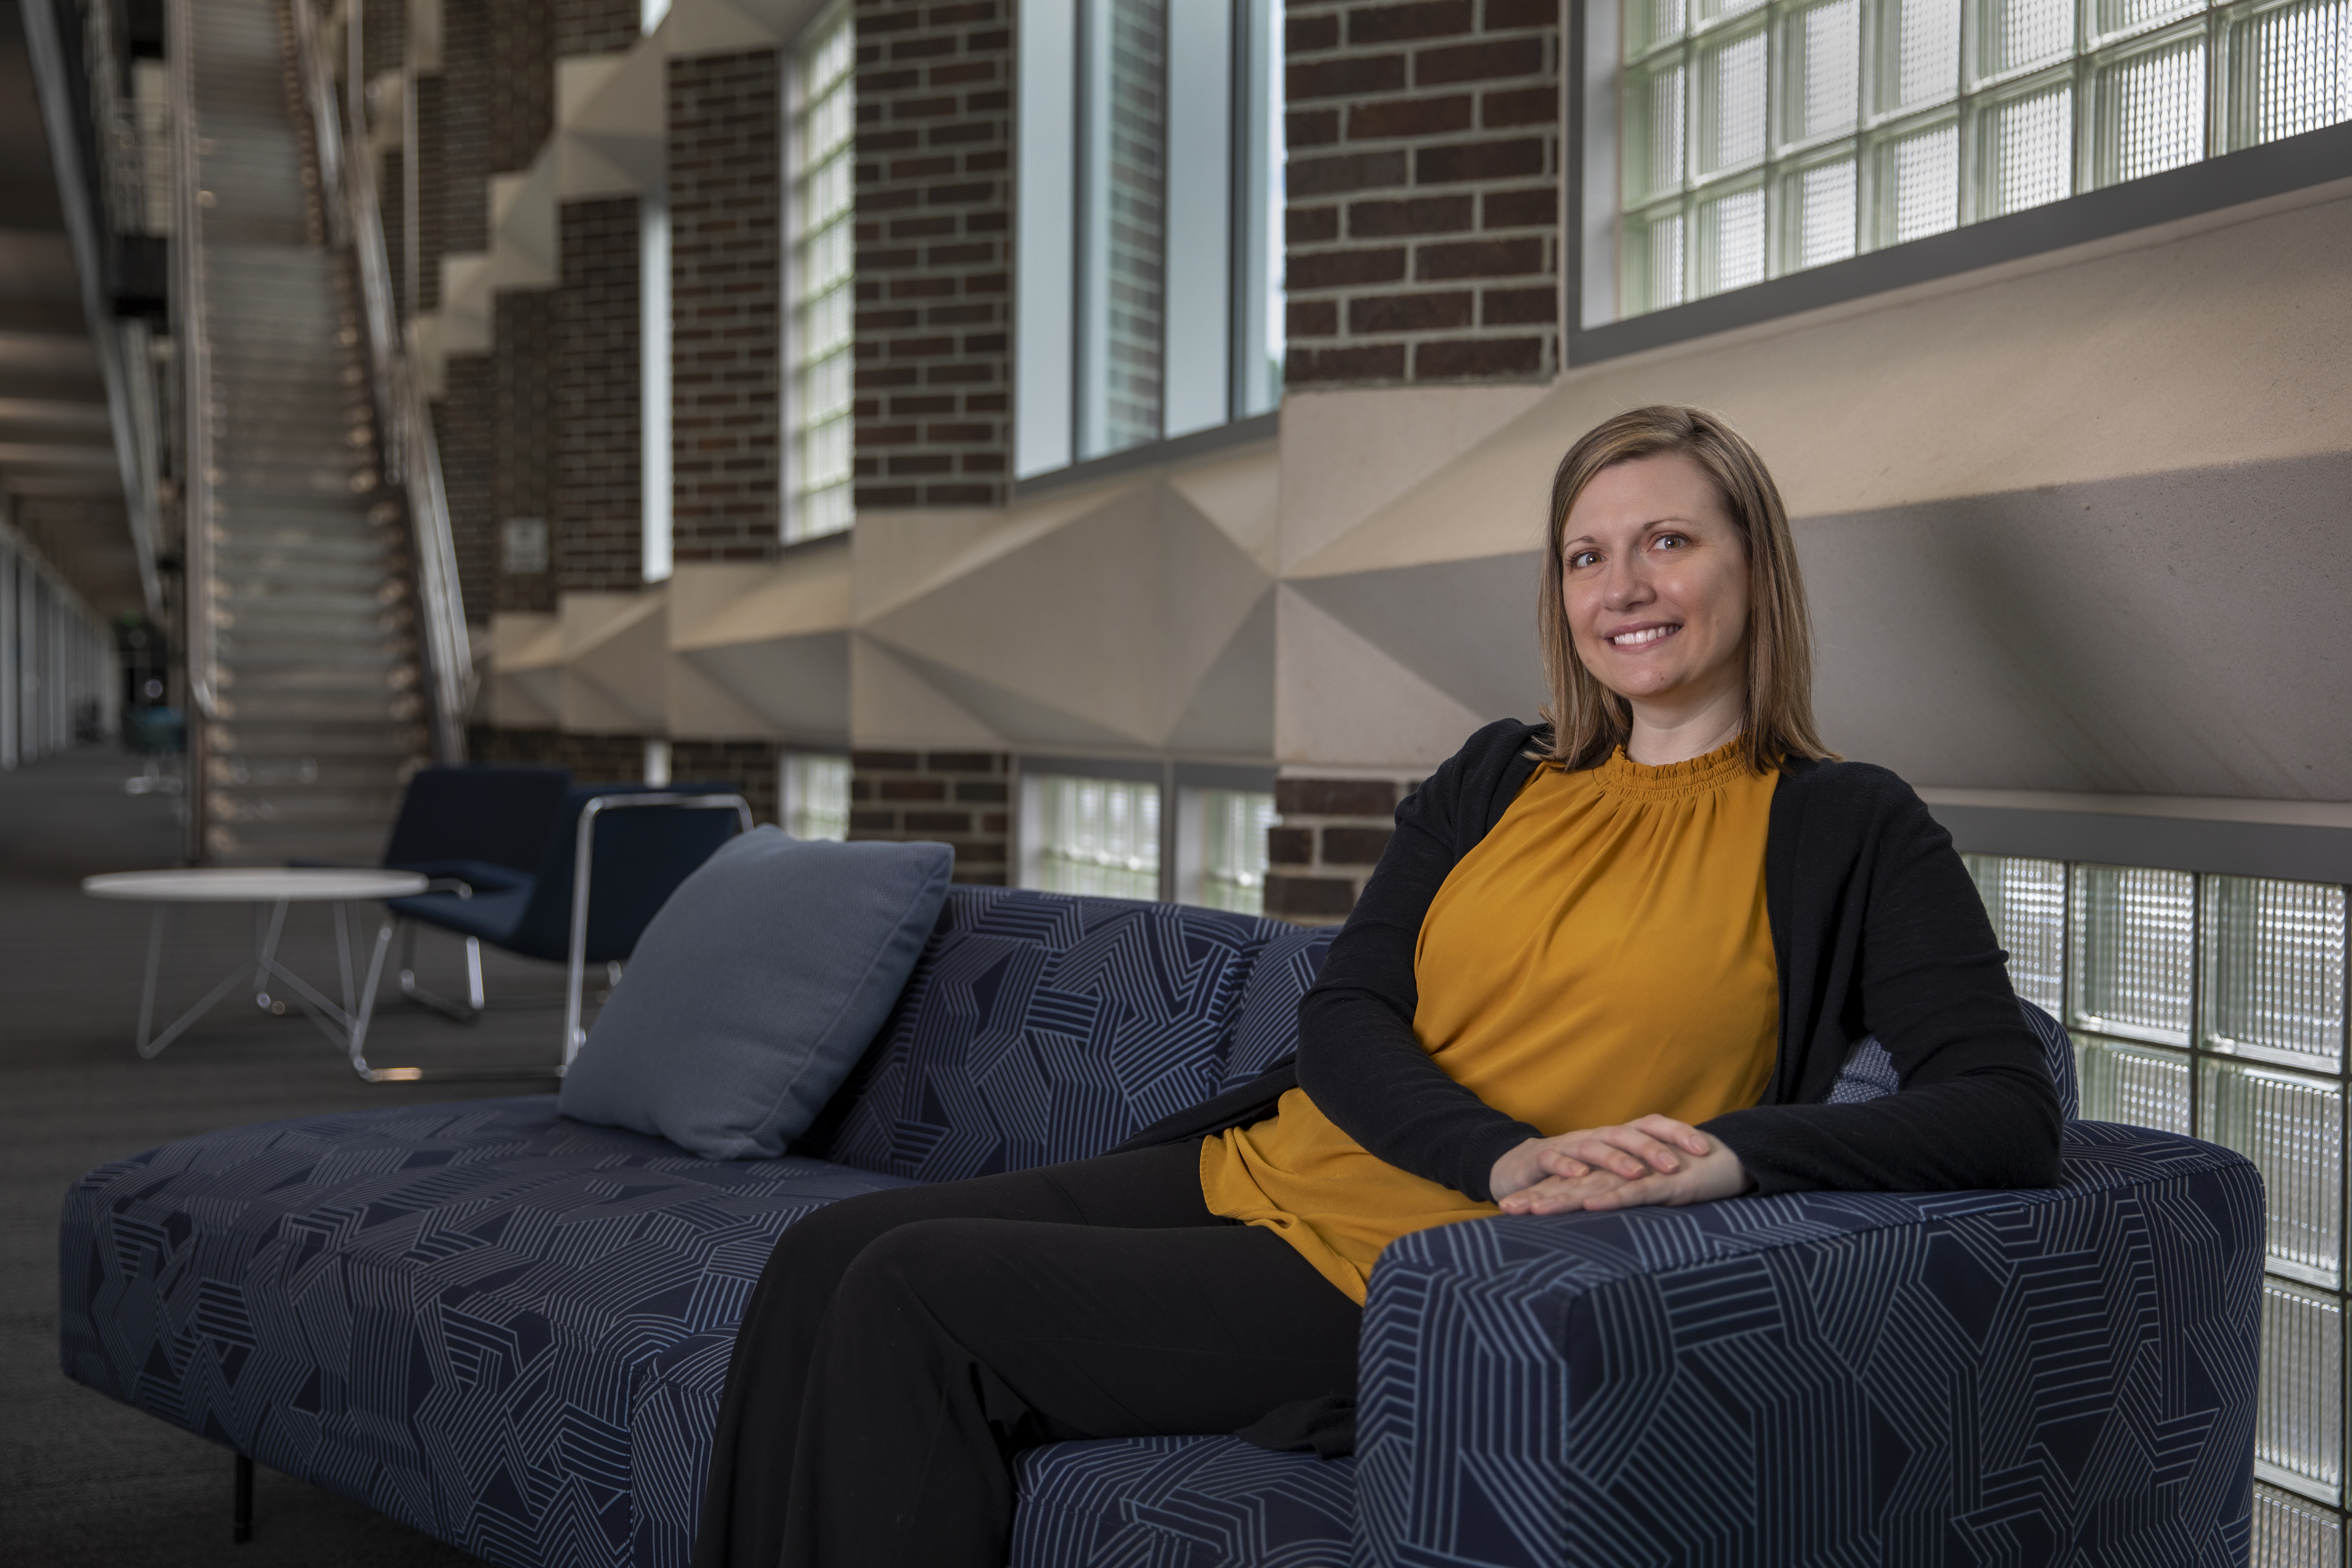 Liz Weldon sits inside the Cobb County Research Facility (CCRF), where she works as a senior research scientist in the Human Systems Engineering Branch.